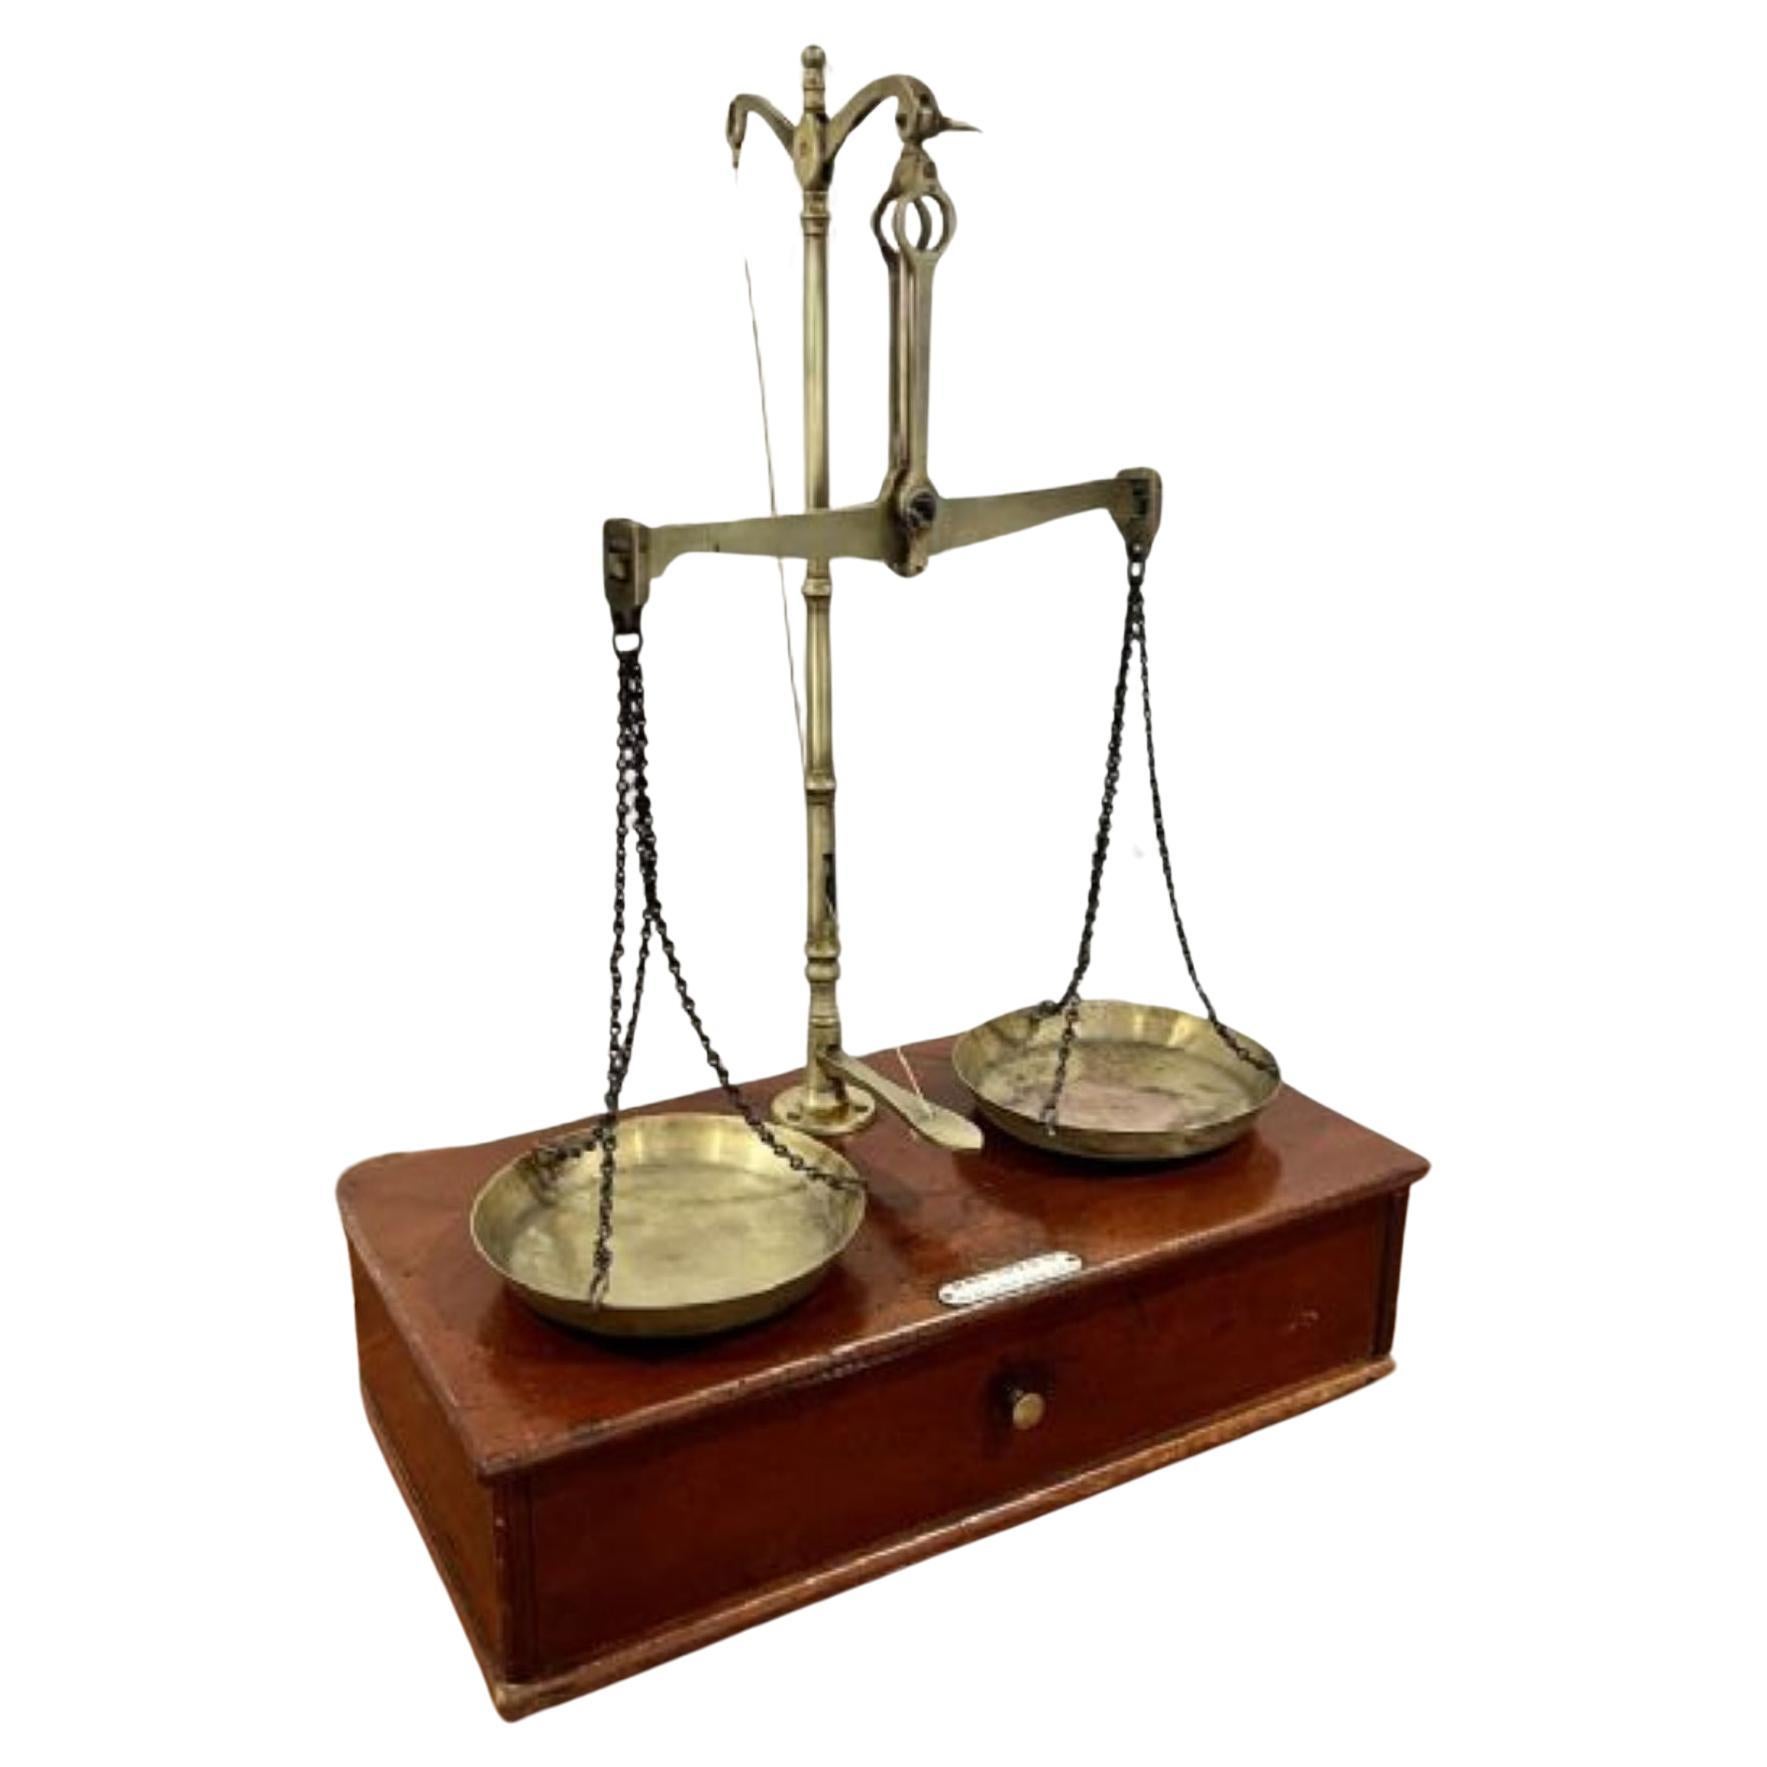 Quality pair of antique Victorian brass scales and weights 